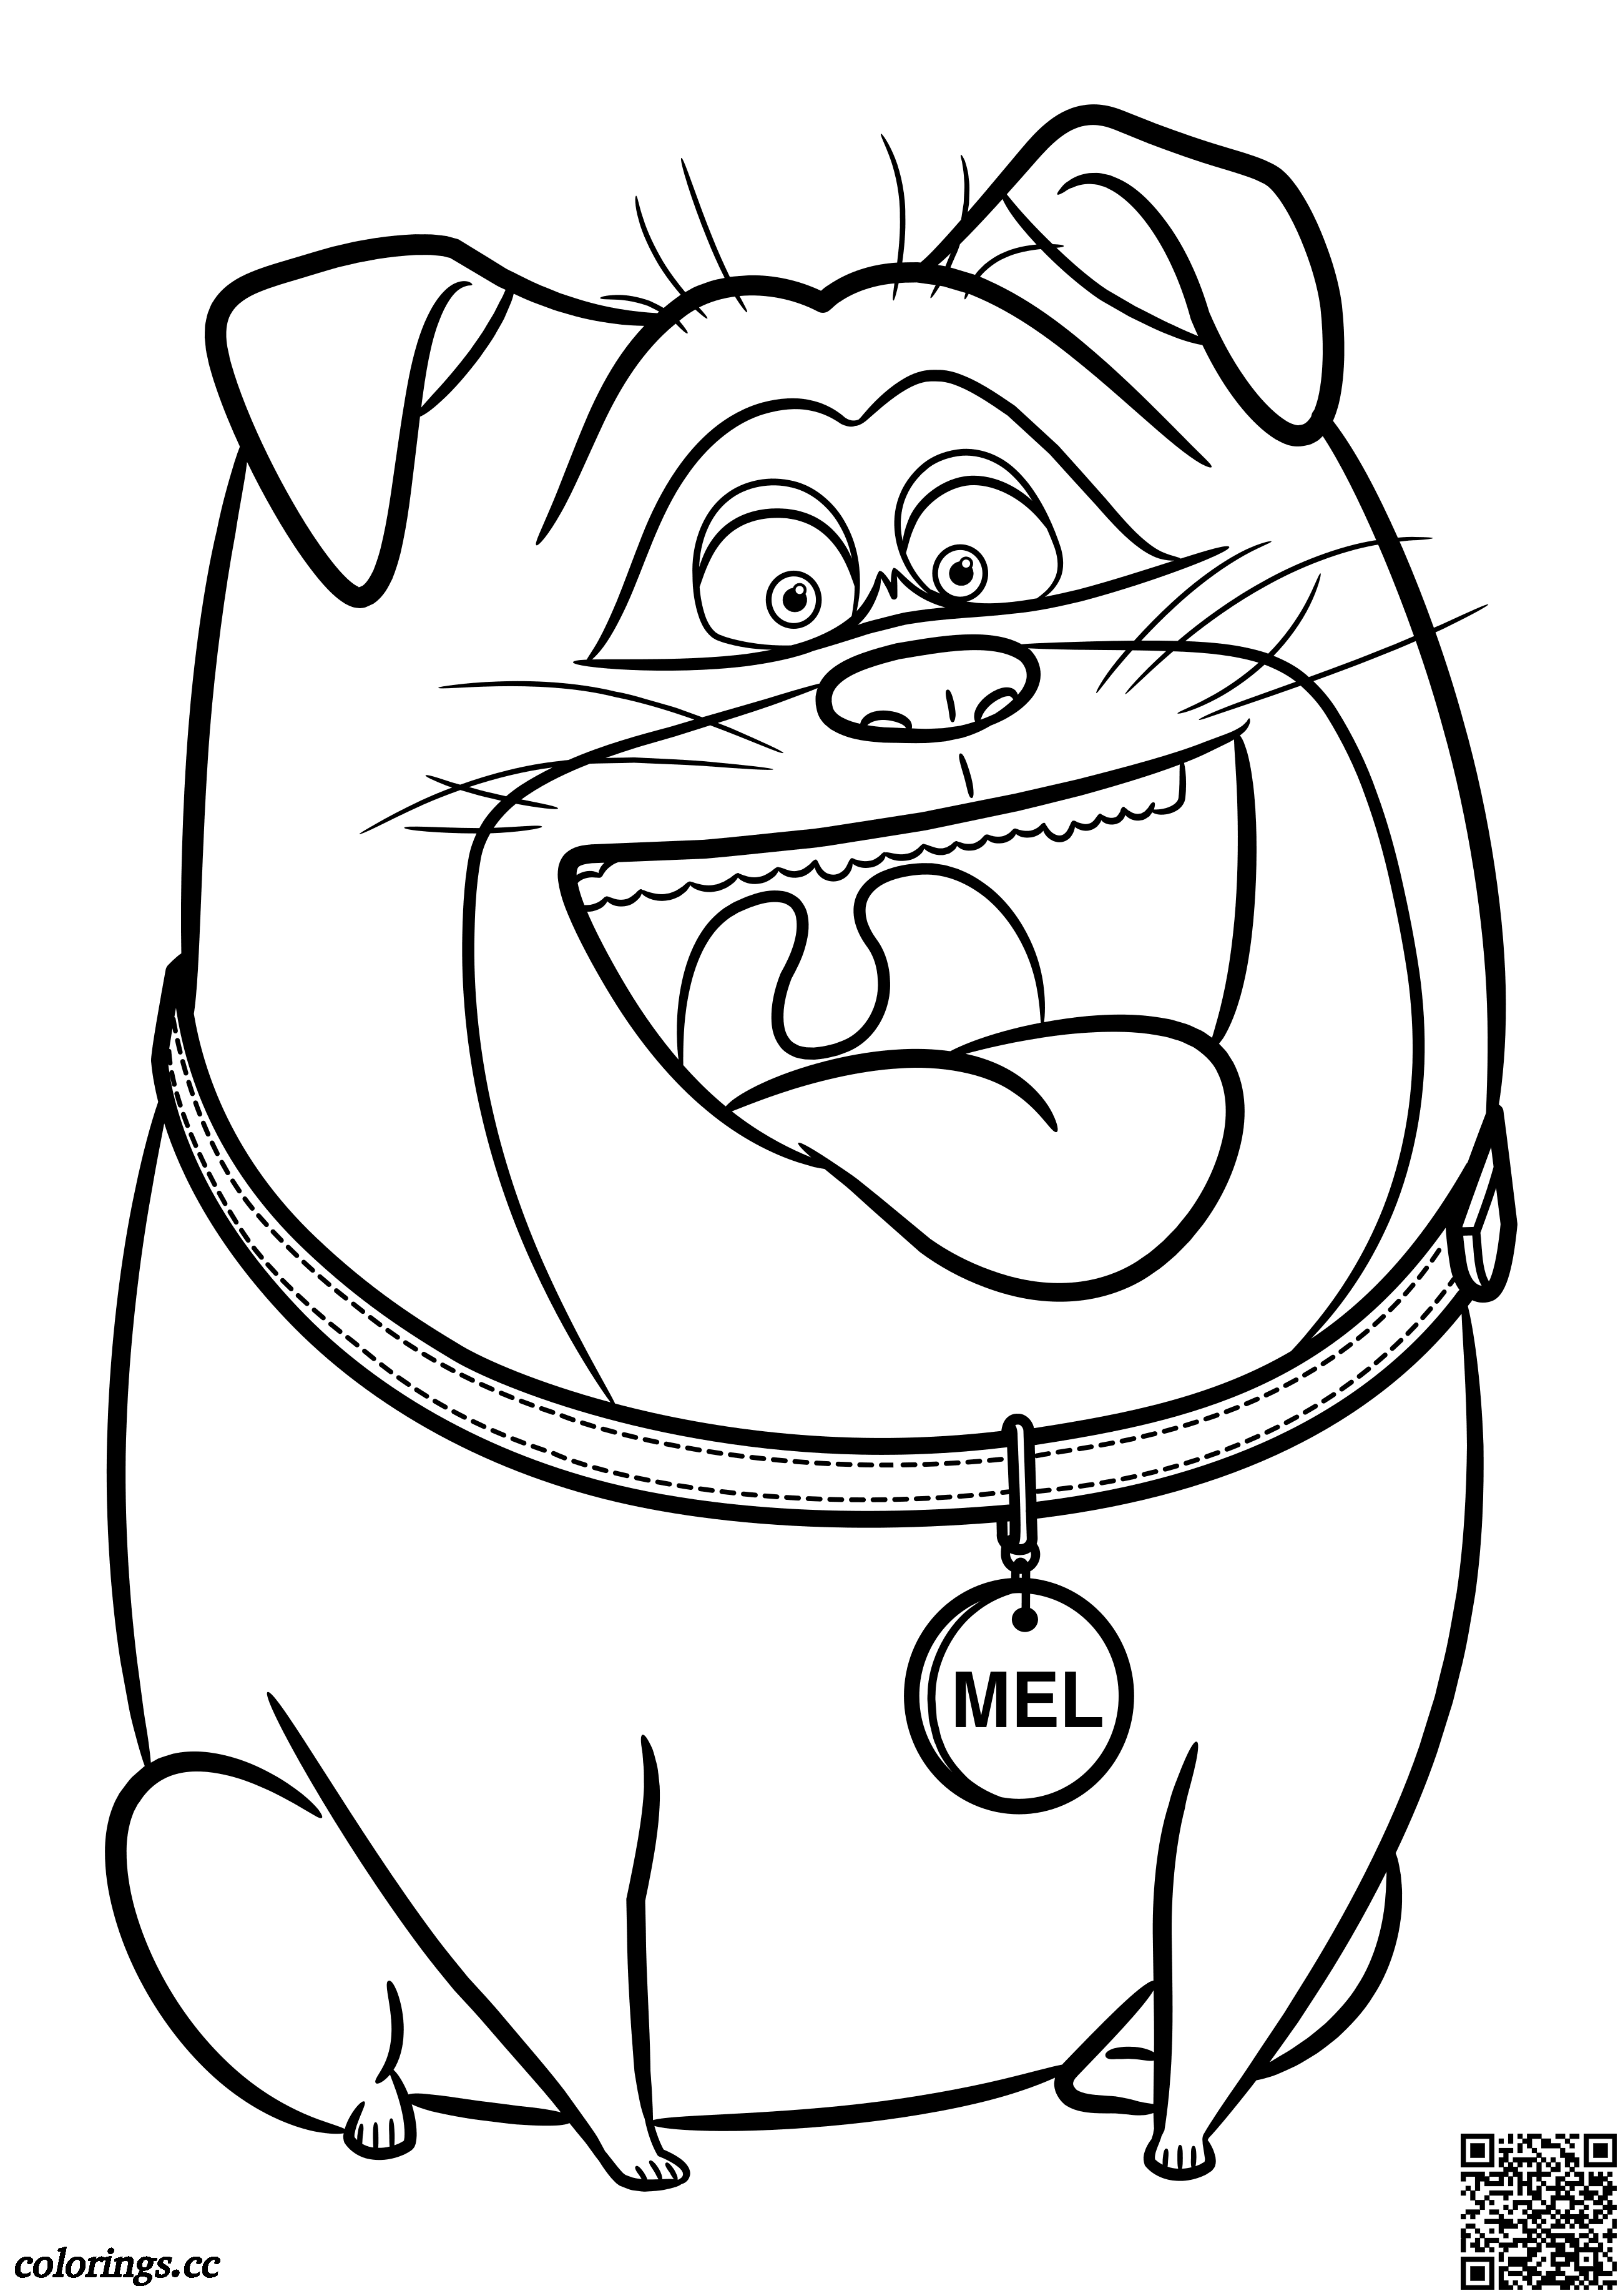 Mel coloring pages, The Secret Life of Pets coloring pages - Colorings.cc